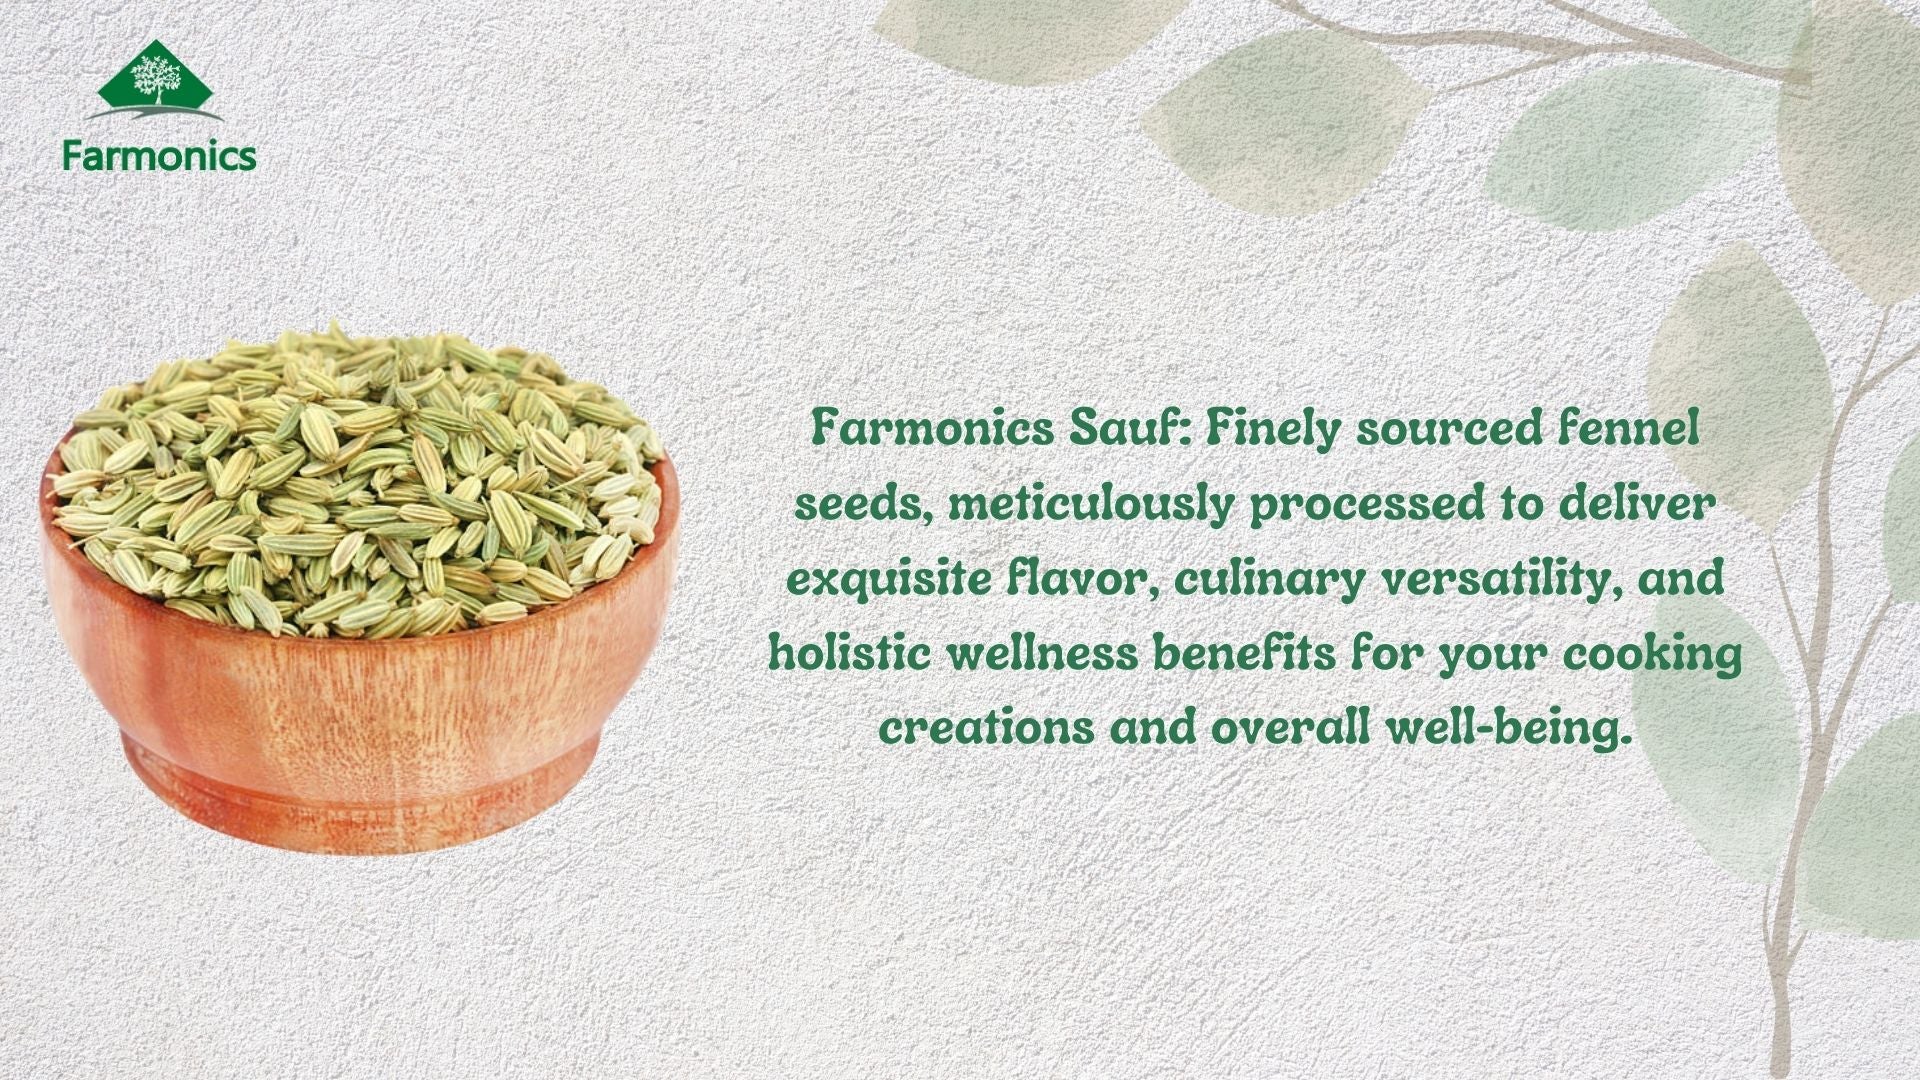 Here are some of the information about Farmonics best quality barik sauf 